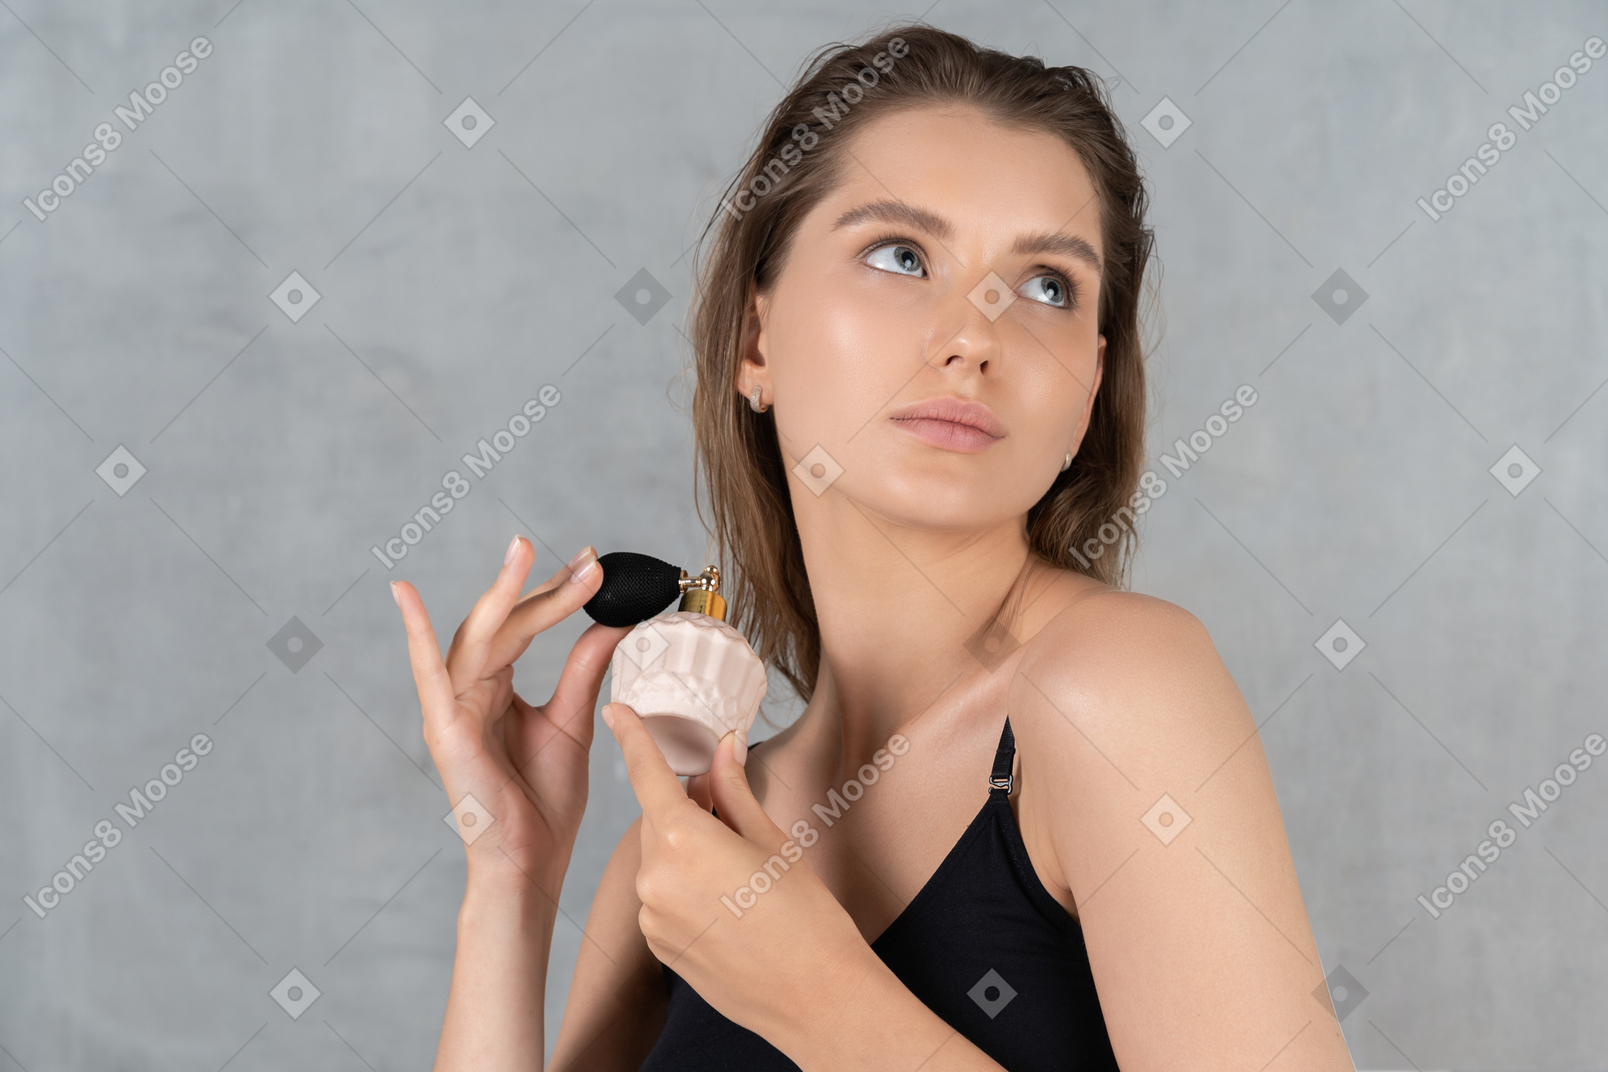 Close-up of a young woman putting on perfume